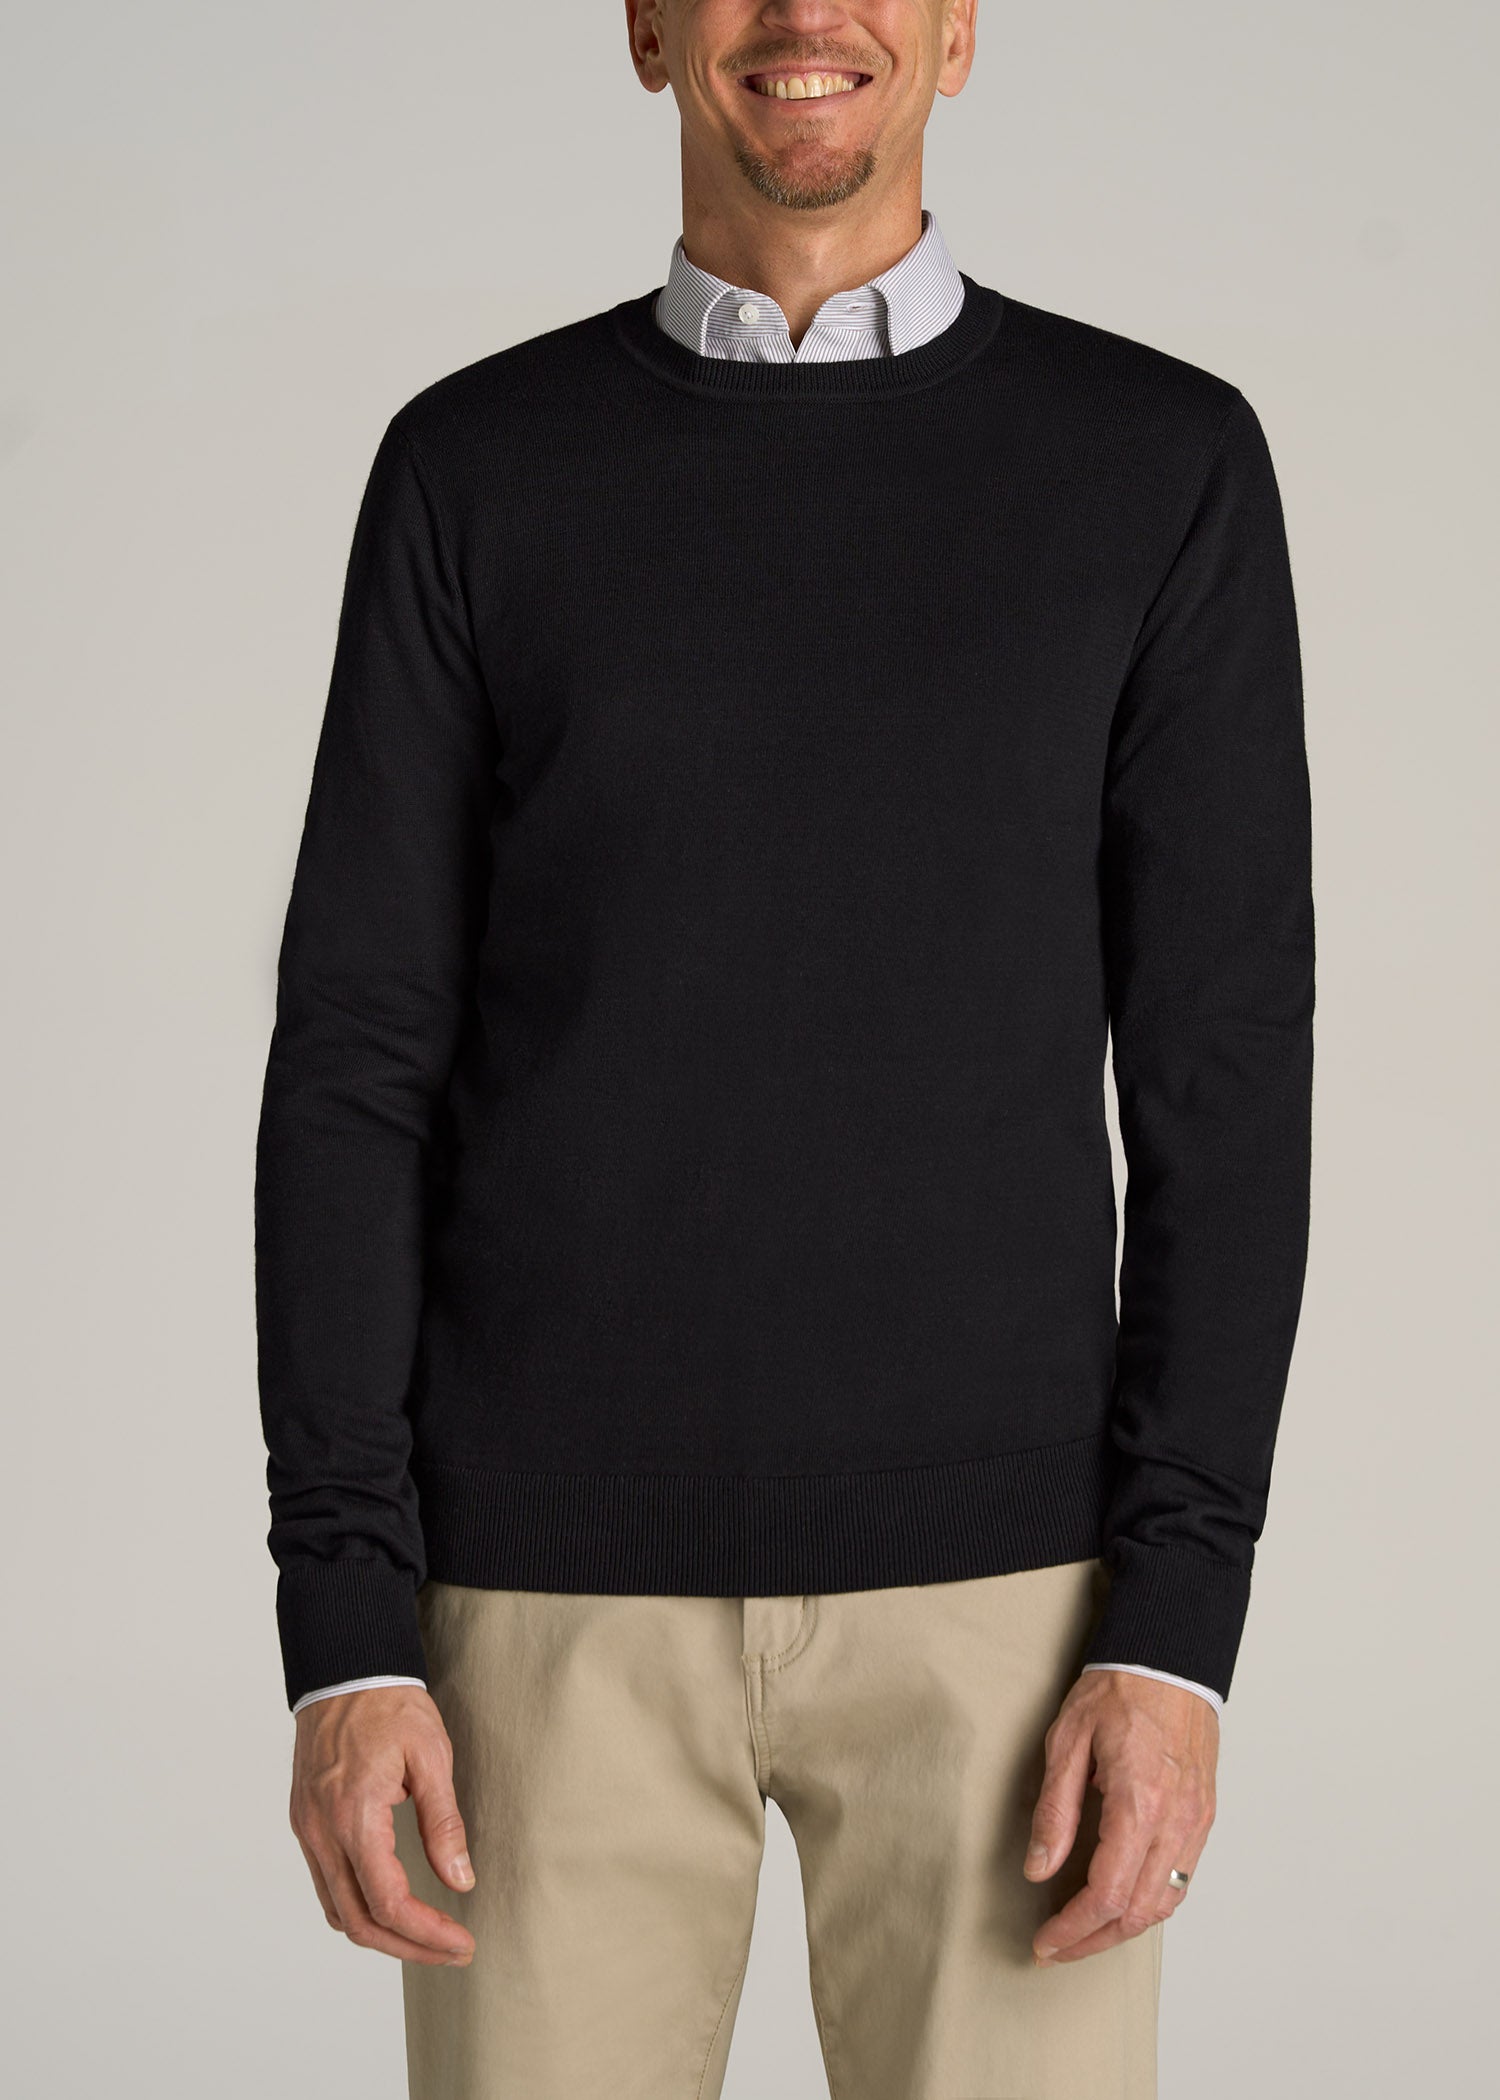 Men's Crewneck Sweaters: Find Shirts & Tops for Your Everyday